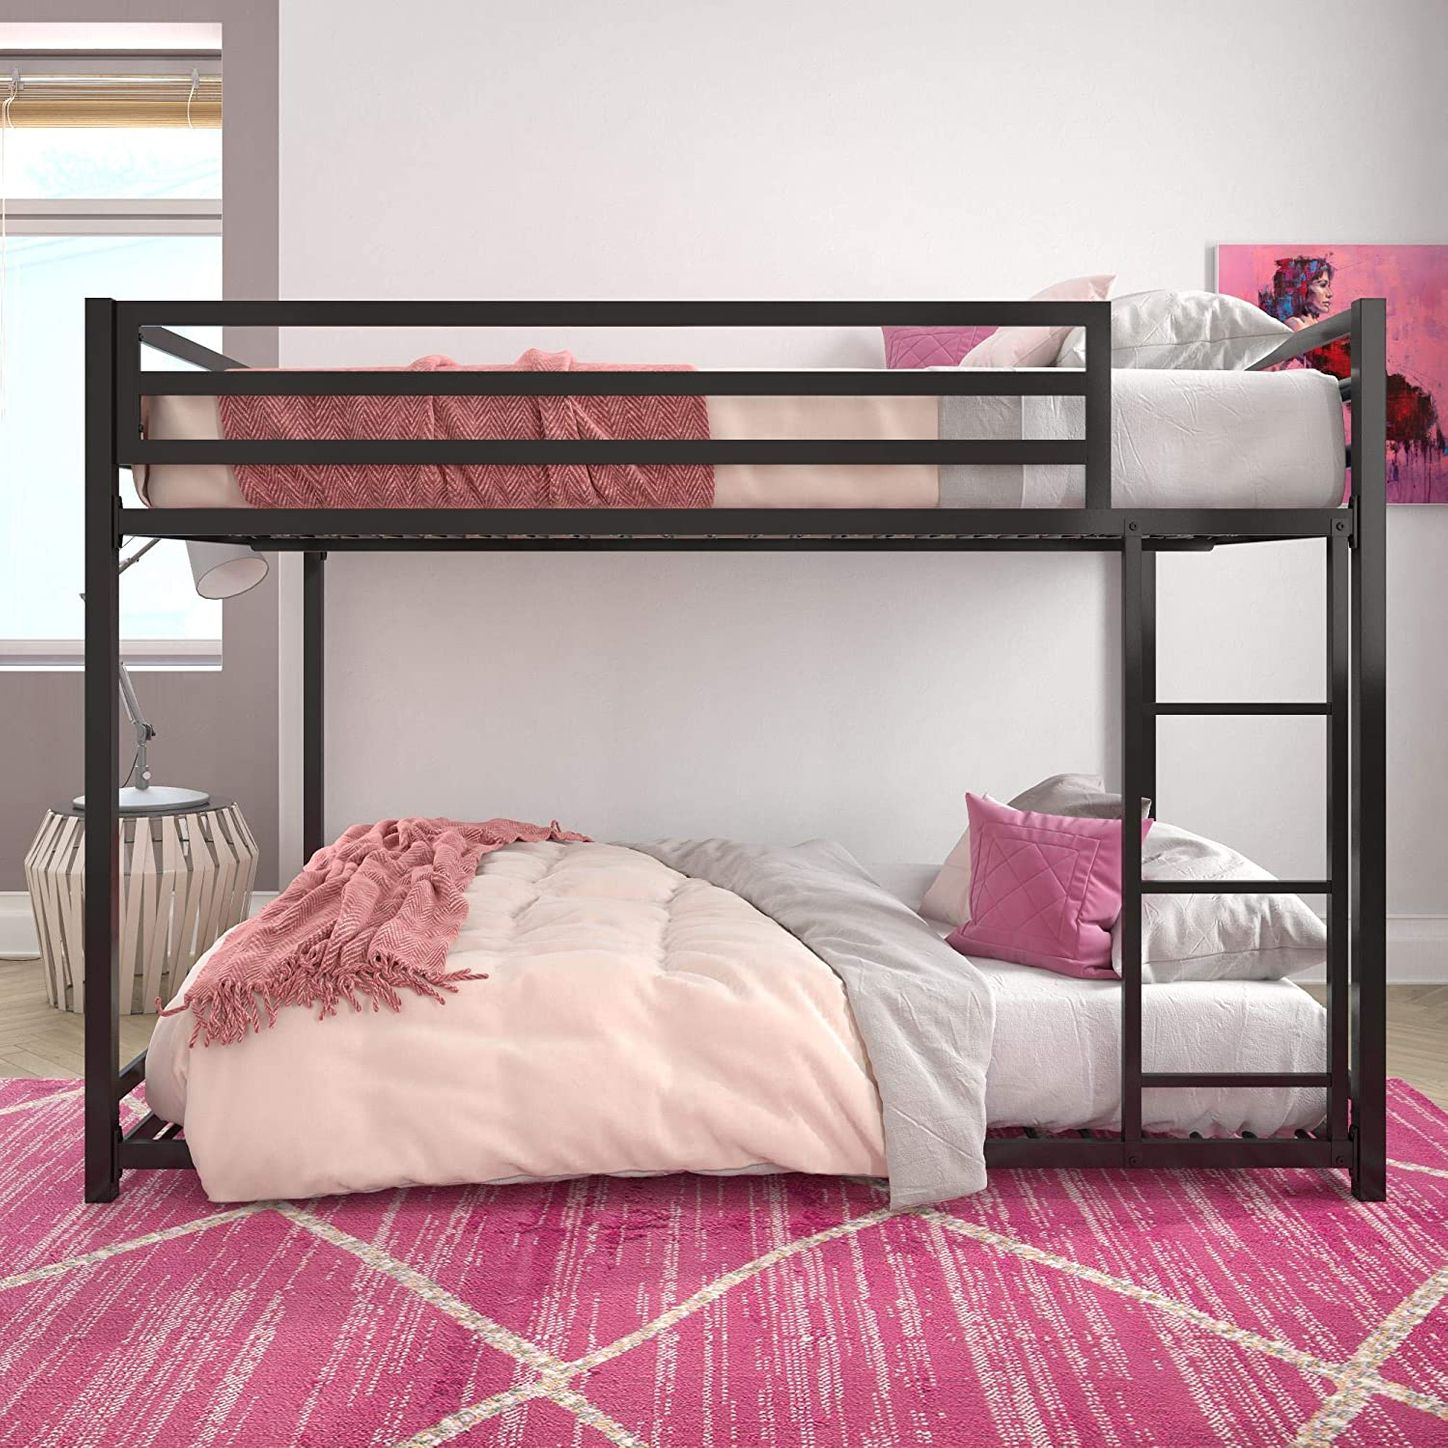 8 Best Bunk Beds 2020 The Strategist, Most Durable Bunk Beds